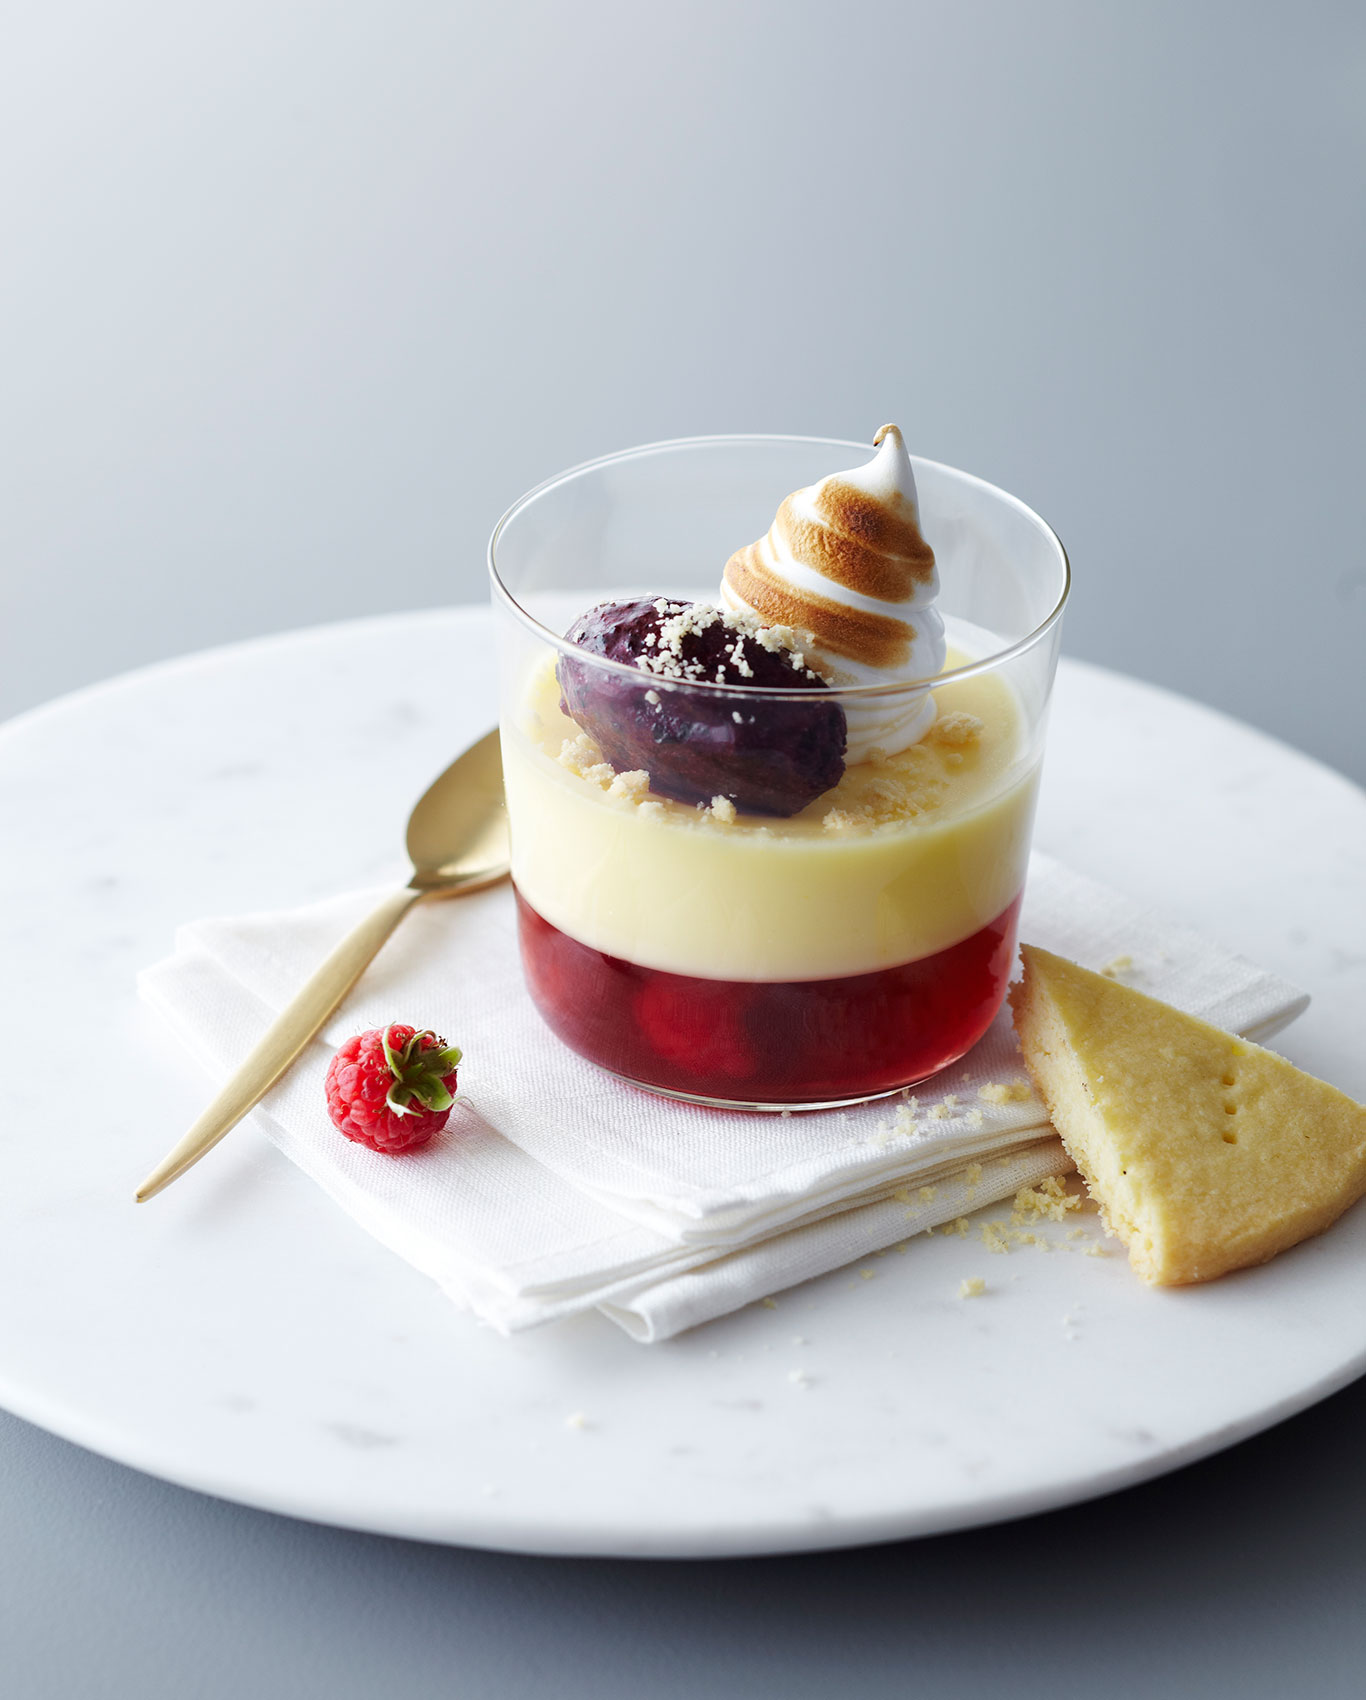 Southon Cooking • The Foodstore Lemon Trifle with Toasted Meringue & Raspberries • Hospitality & Editorial Food Photography